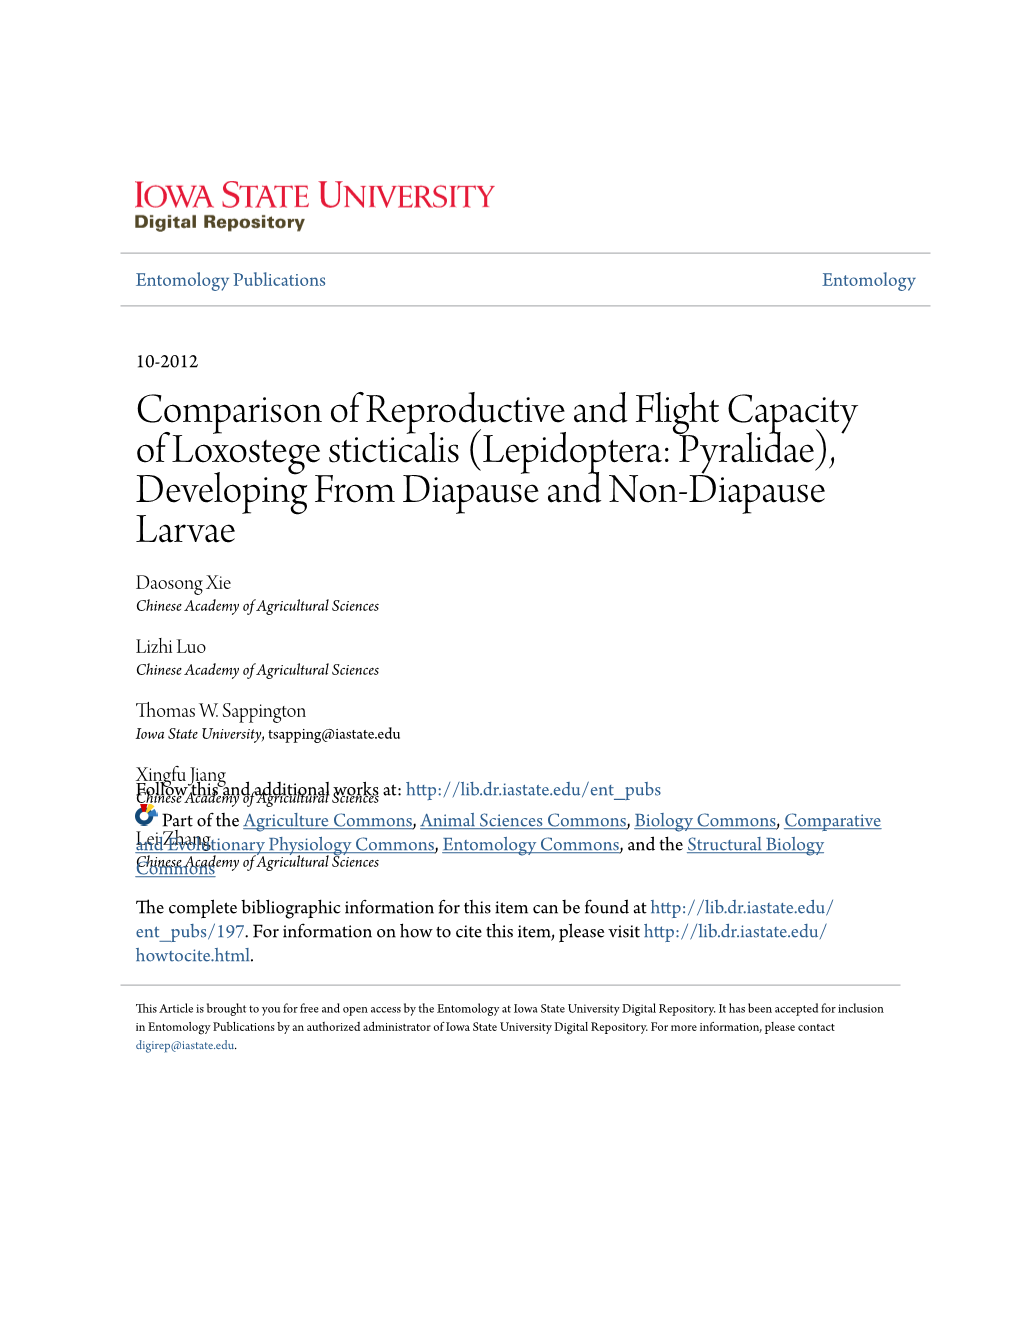 Comparison of Reproductive and Flight Capacity of Loxostege